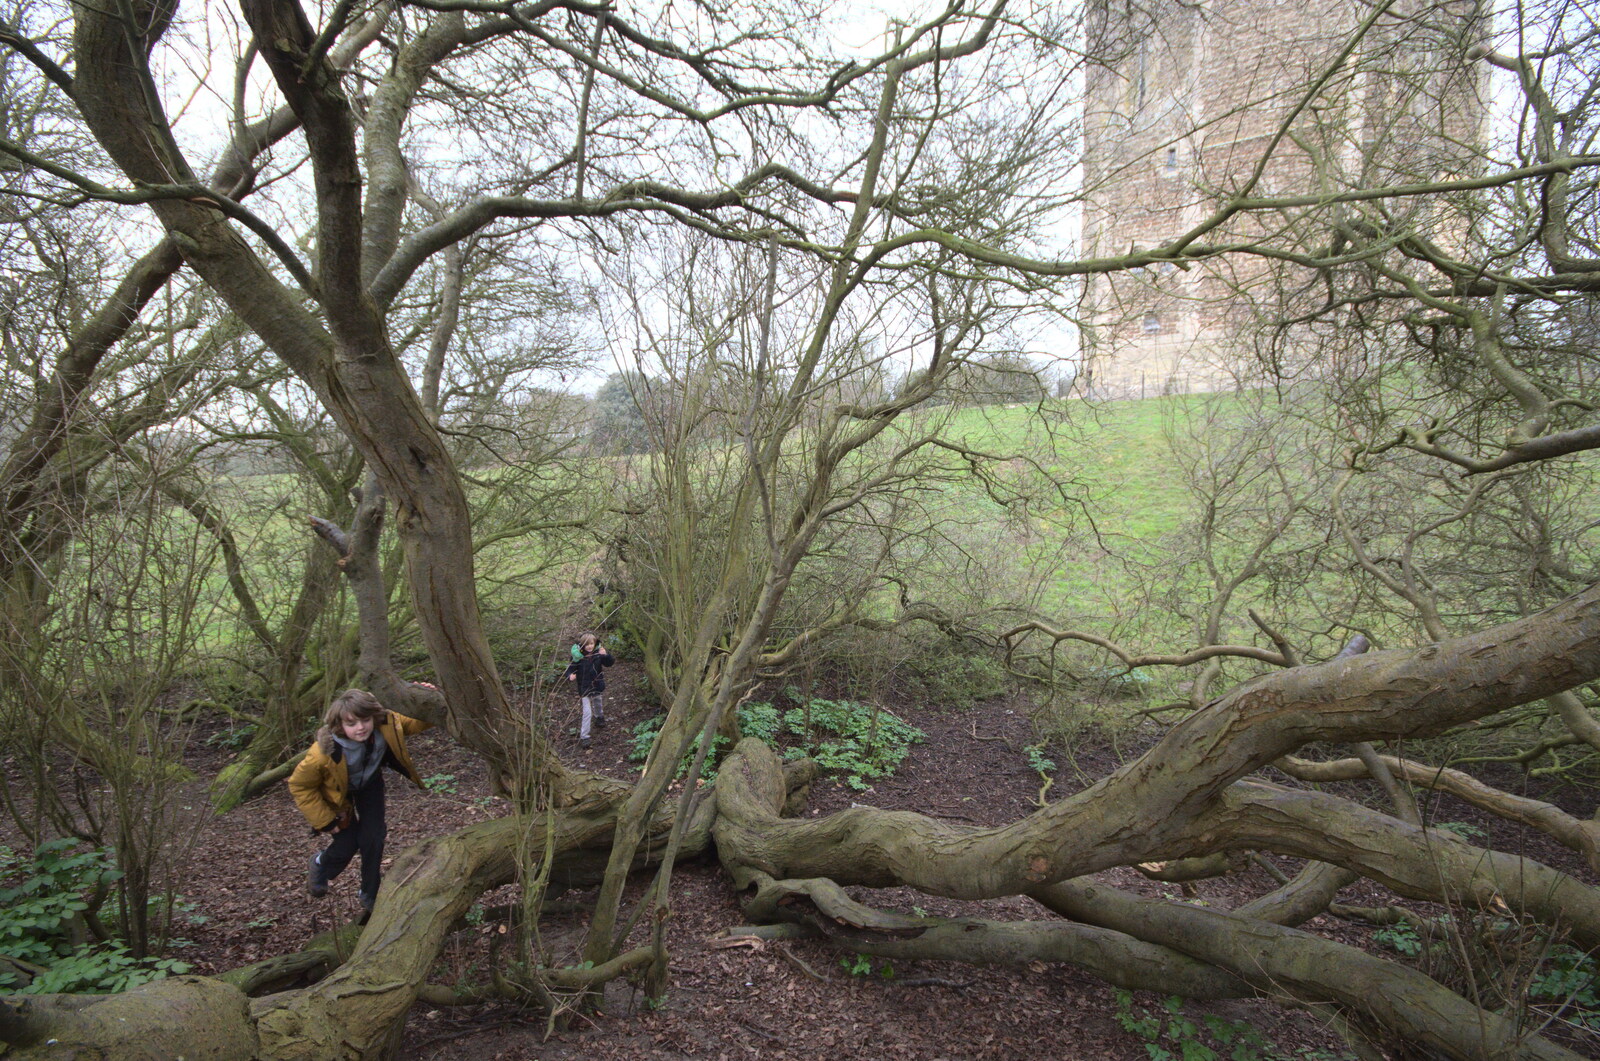 A Trip to Orford, Suffolk - 25th January 2020: The boys in one of their favourite climbey trees 